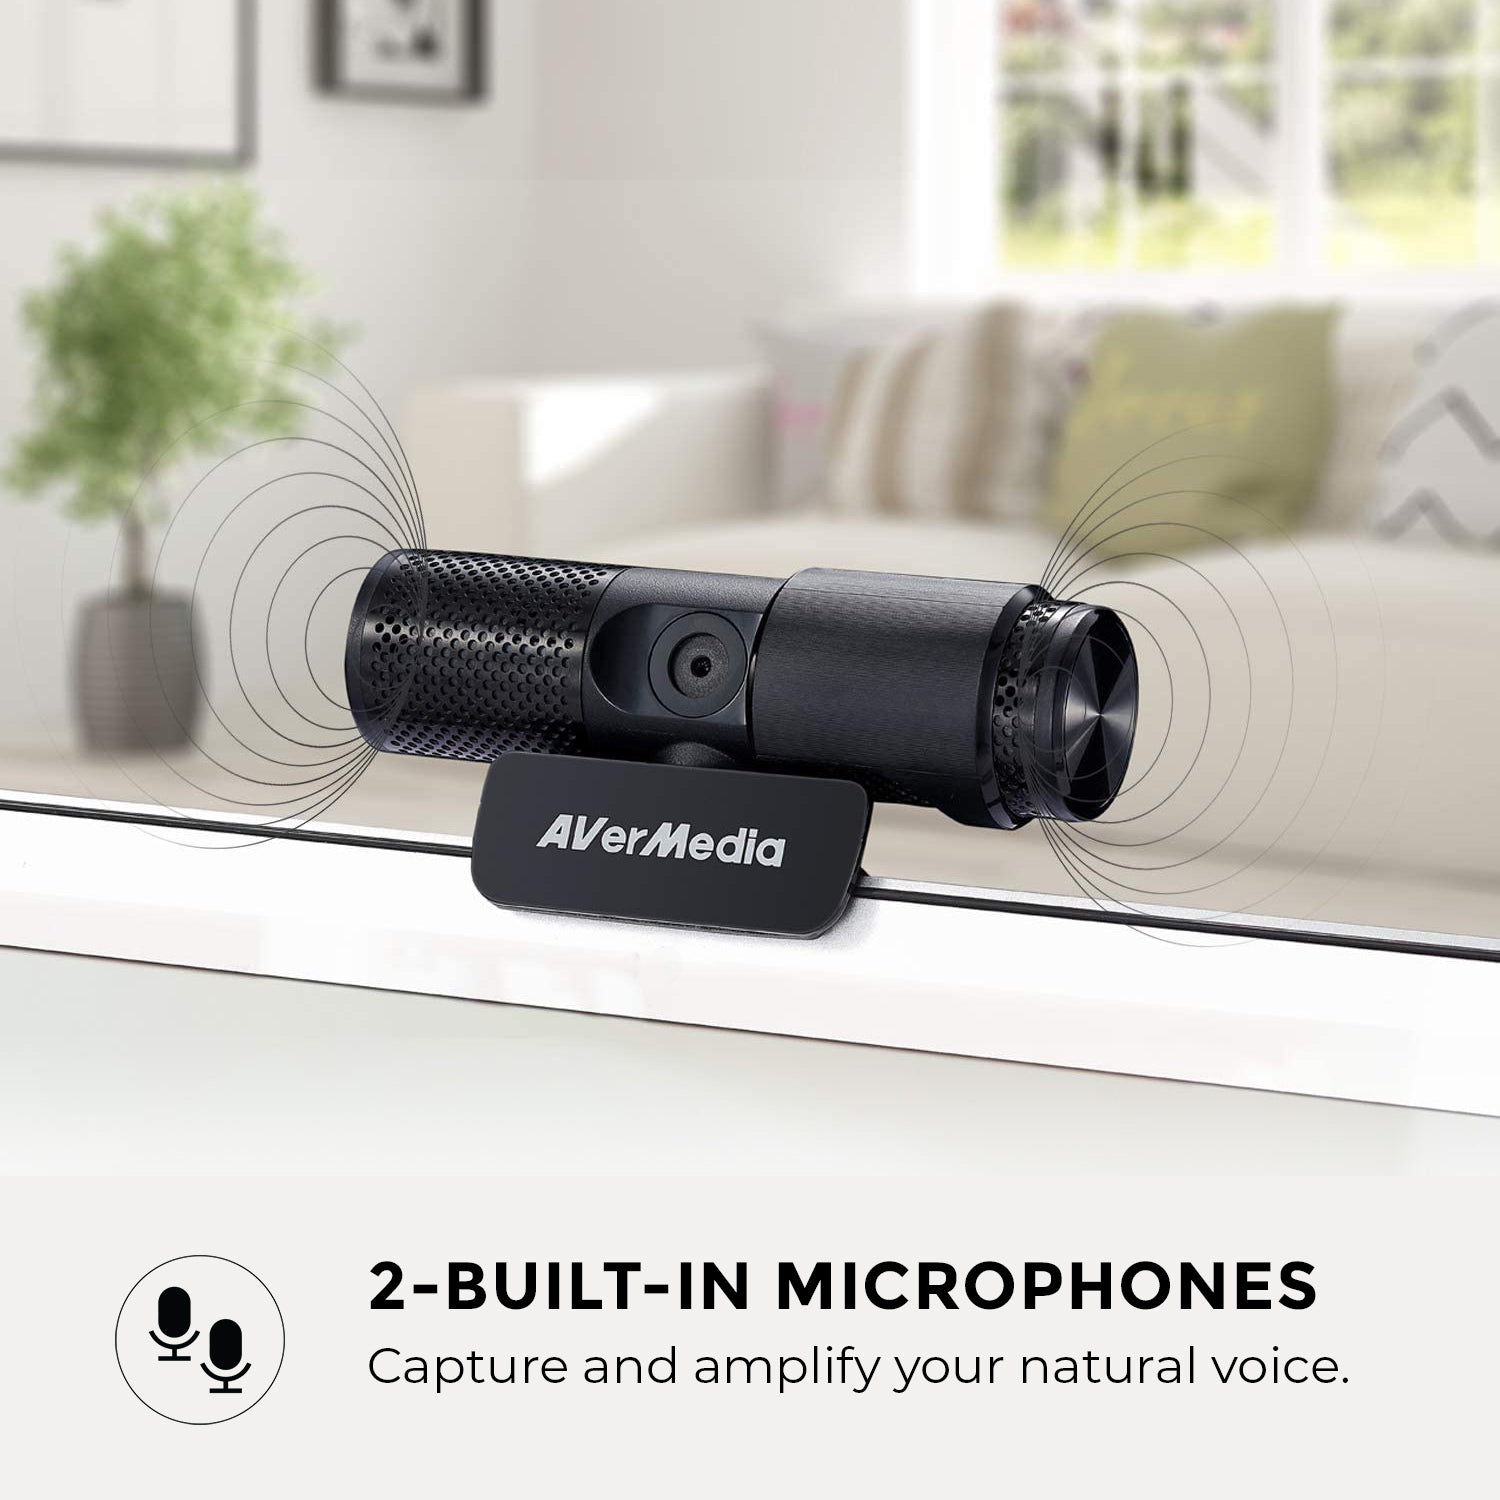 2 Built-in microphones: capture and amplify your natural voice.